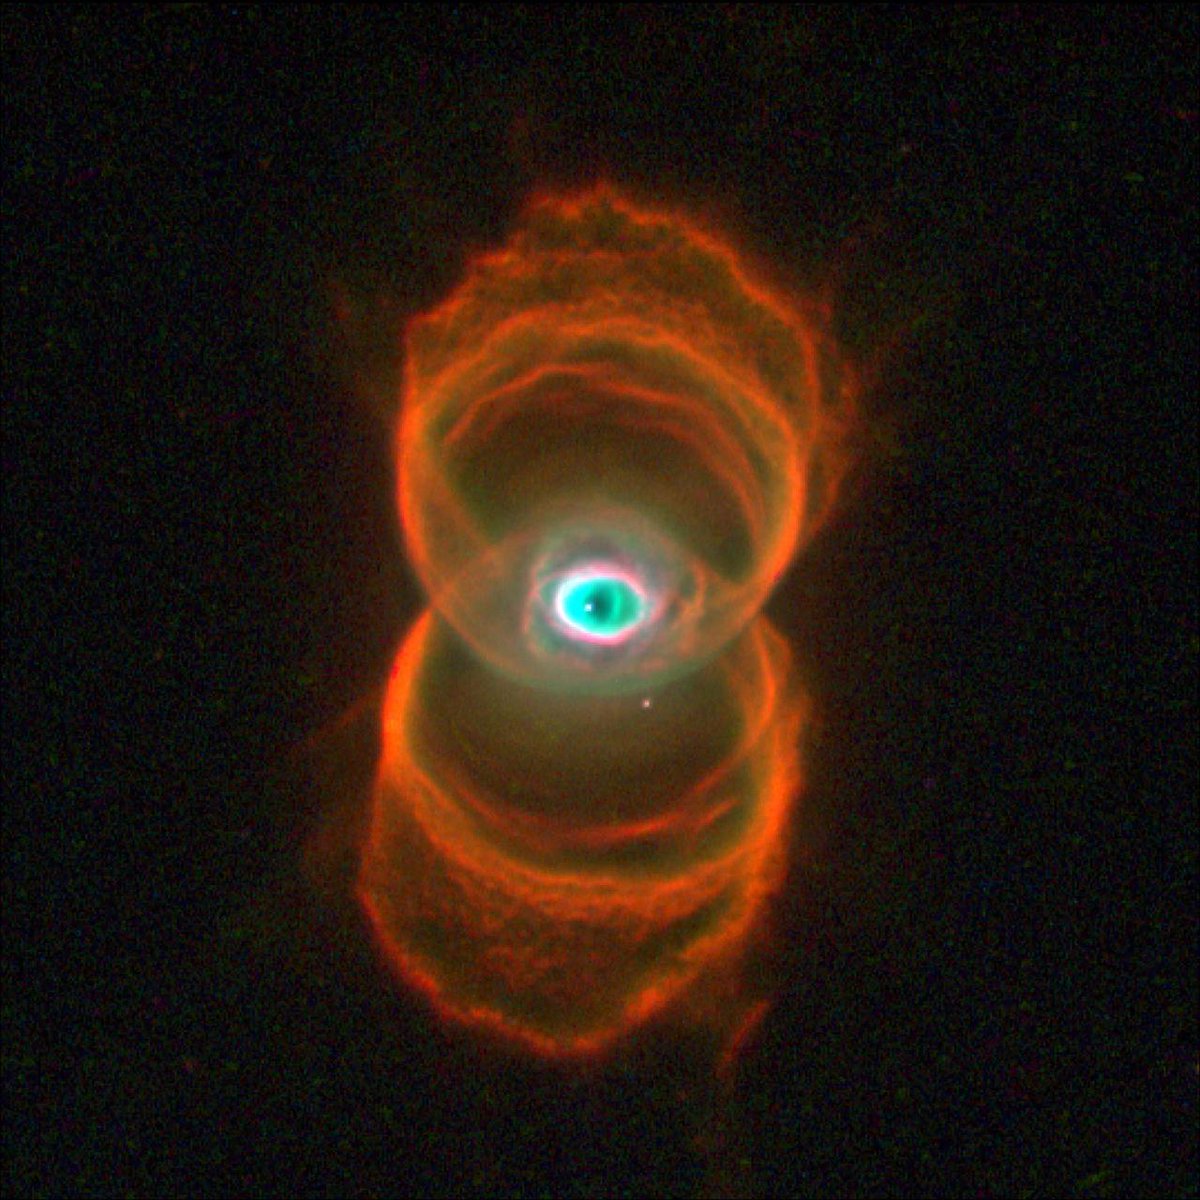 Guess what time it is? ⌛

Through the end of April, we’re showcasing #HubblesWildest images.

Hubble just turned 34 years old yesterday, and over the course of its mission, it’s found some odd views in our universe – like this one of the Hourglass Nebula: go.nasa.gov/3UvUtDM